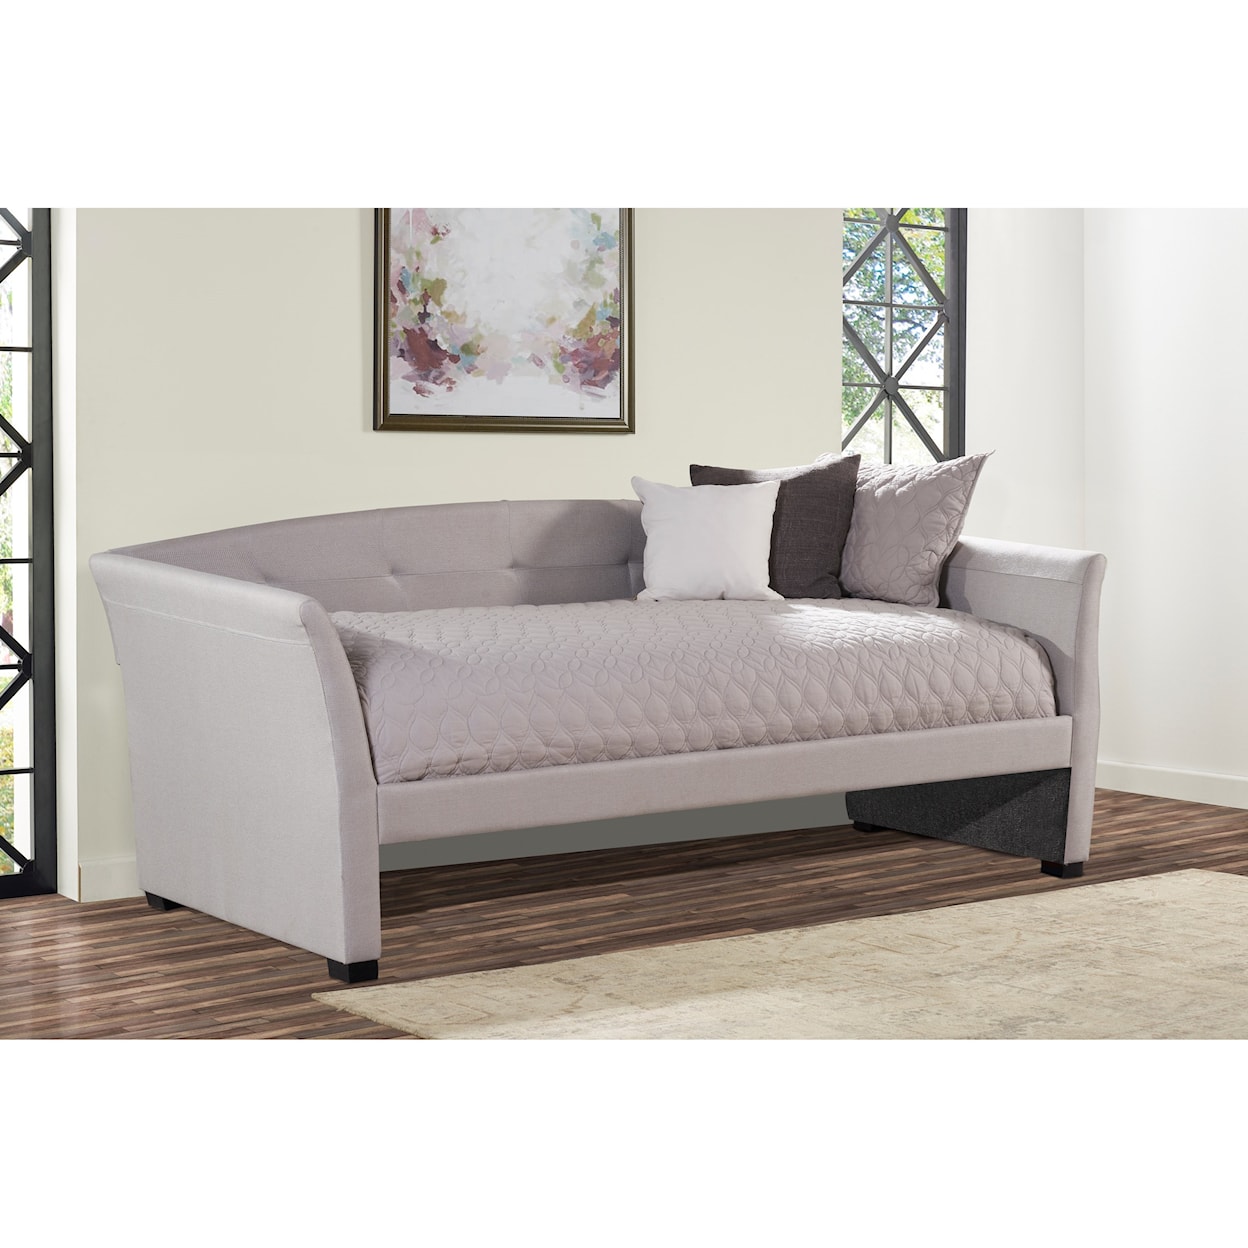 Hillsdale Morgan 2412 010v020v Contemporary Upholstered Daybed Wayside Furniture And Mattress 